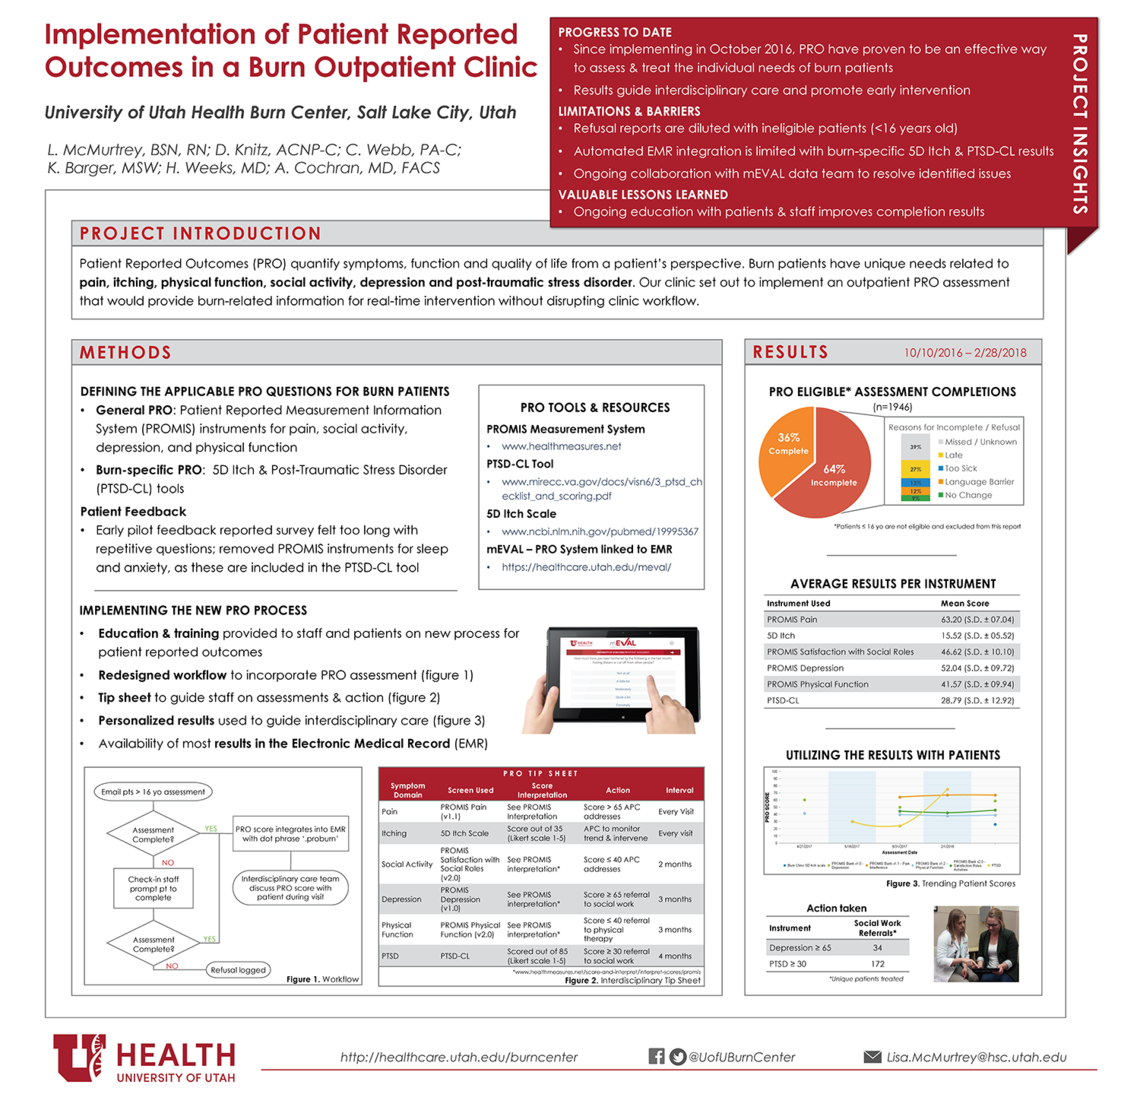 example uofuhealth implementation of patient reported outcomes in a burn outpatient clinic